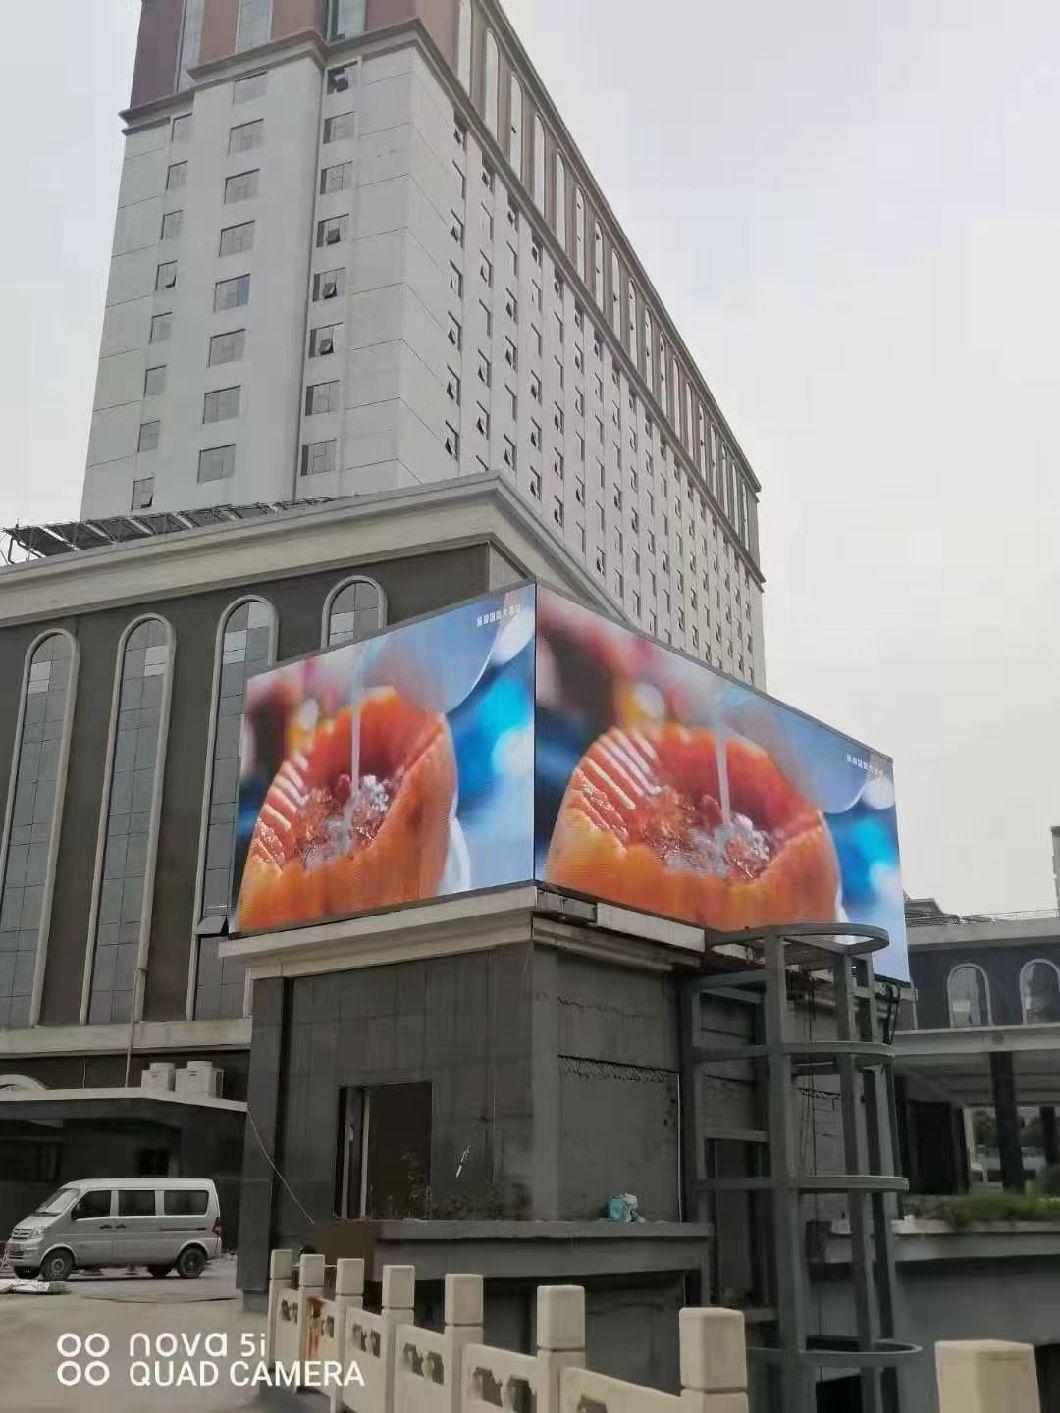 Outdoor Giant Video Billboard High Brightness P6.35 Full Color LED Advertising Display Screen